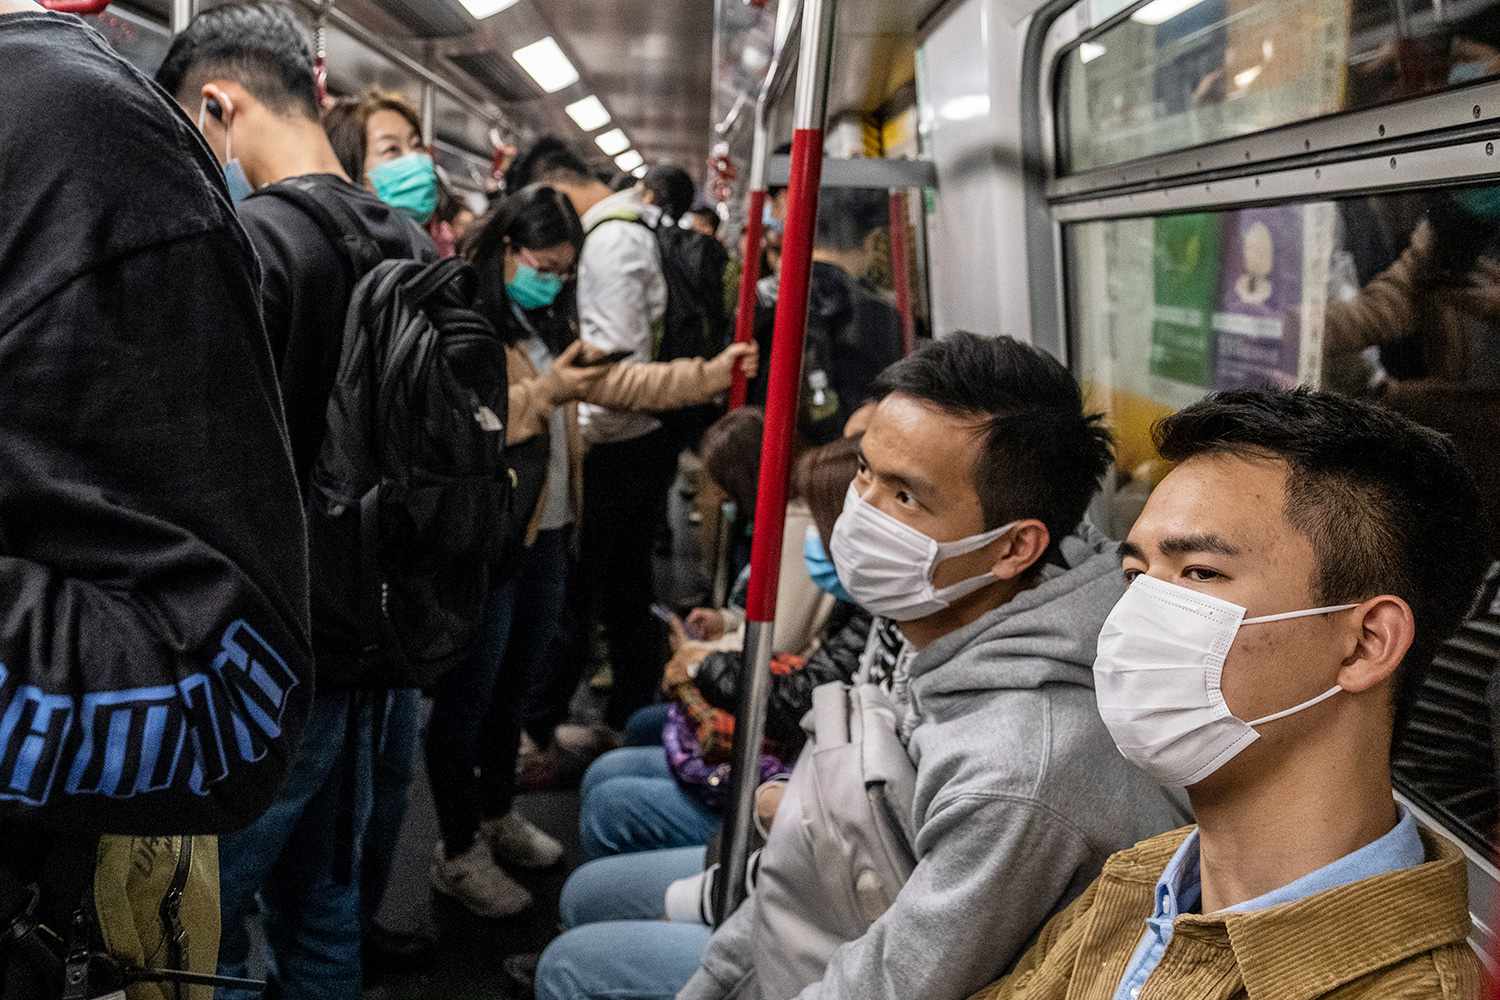 People wearing mask are seen riding the MTR train on January 22, 2019 in Hong Kong, China